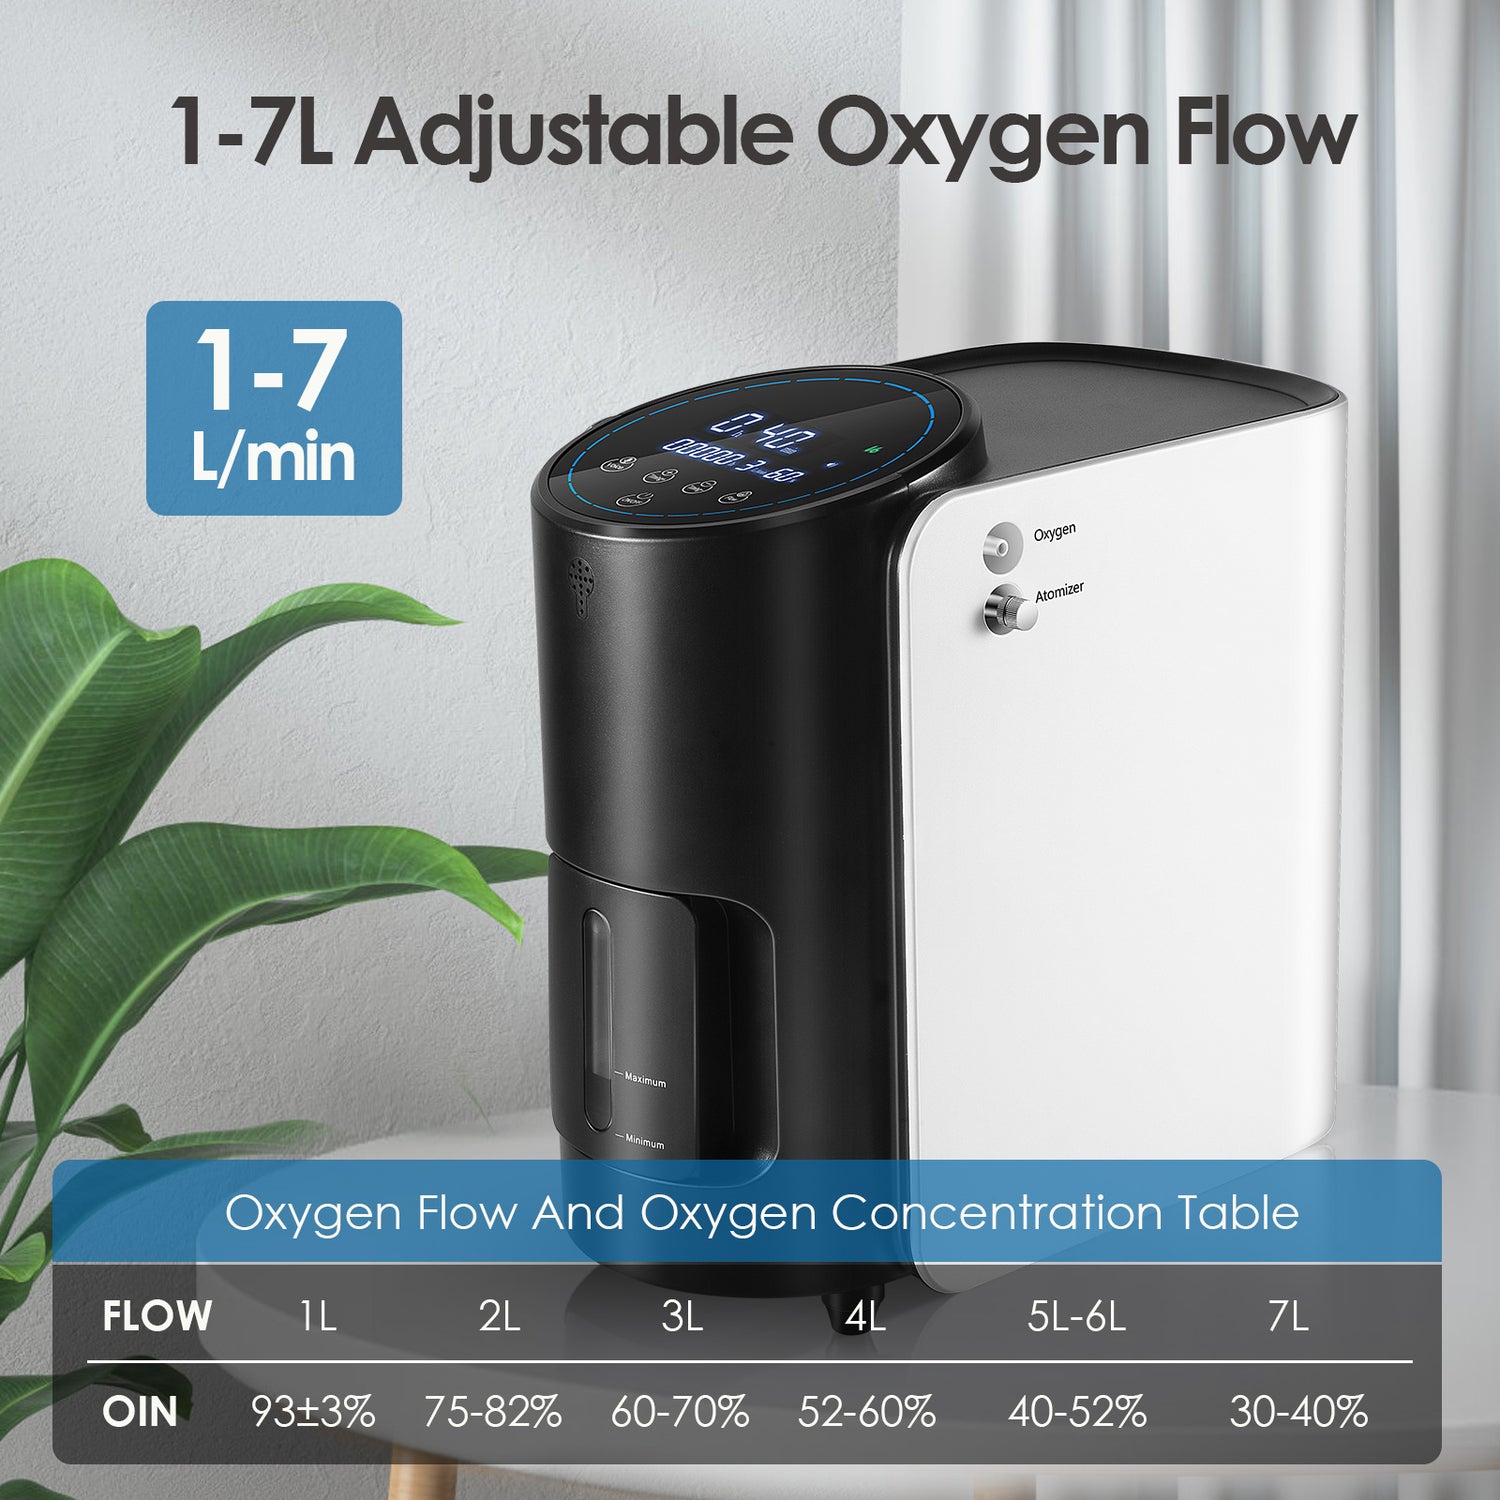 High oxygen concentration and adjustable flow